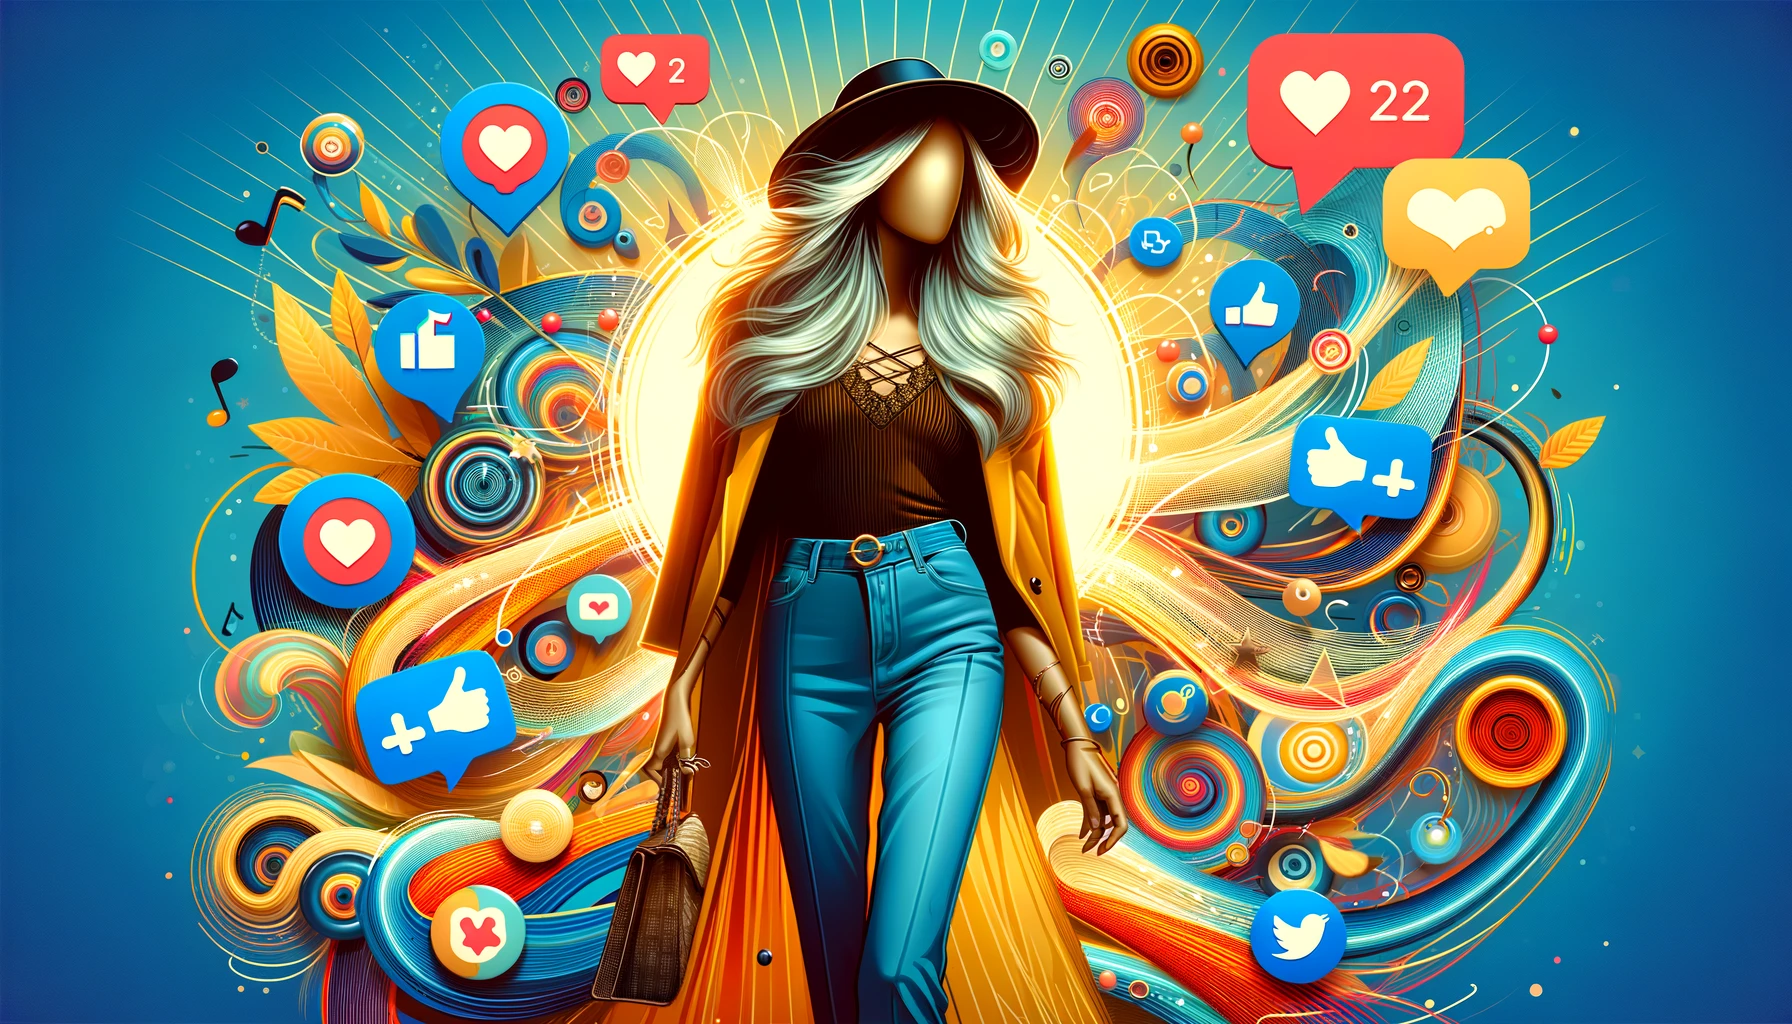 Explore the dynamic world of TikTok influencer marketing through the lens of Shelby Mariaa's success story. Delve into effective strategies for connecting with global audiences in fashion and lifestyle niches on this powerhouse platform."